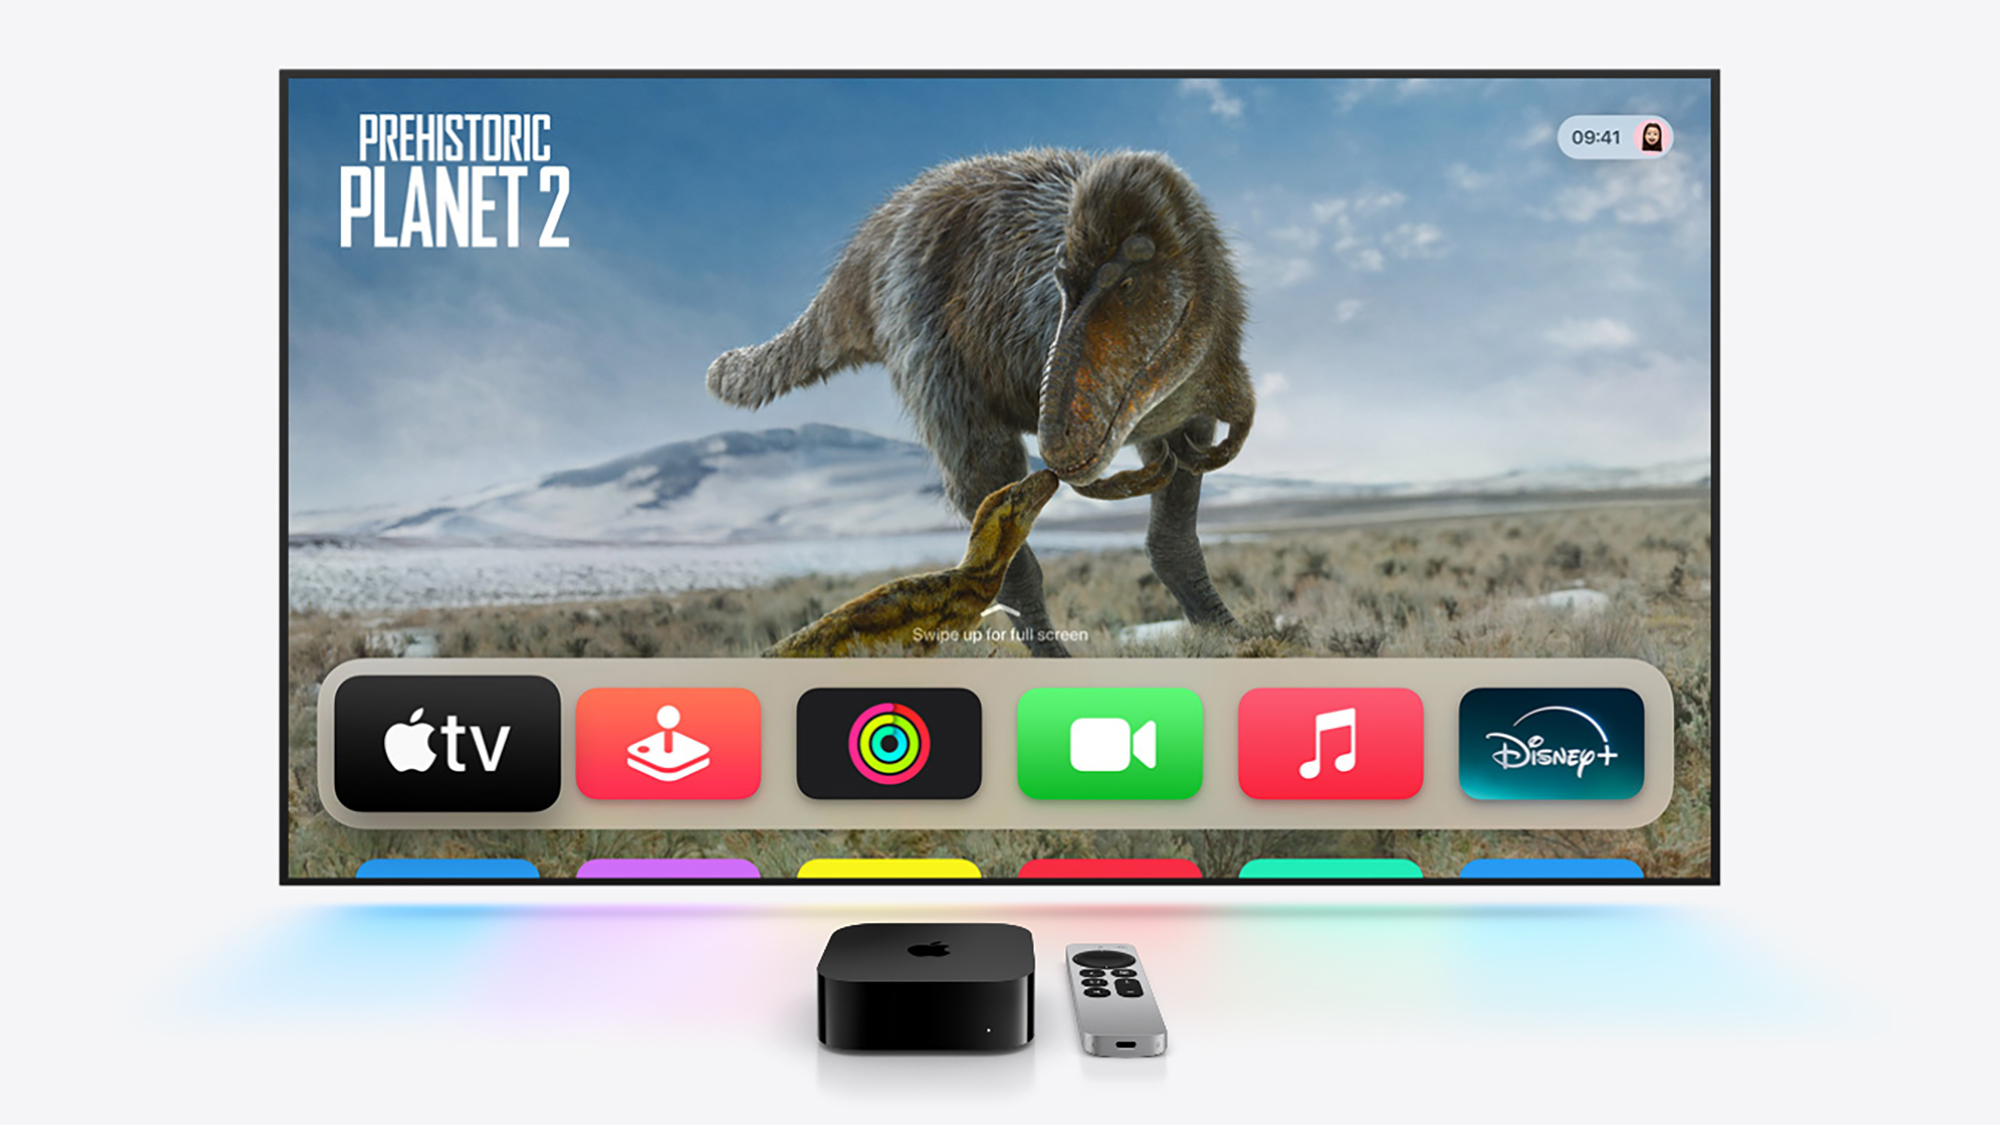 apple tv with a dinosaur show and the device in the foreground